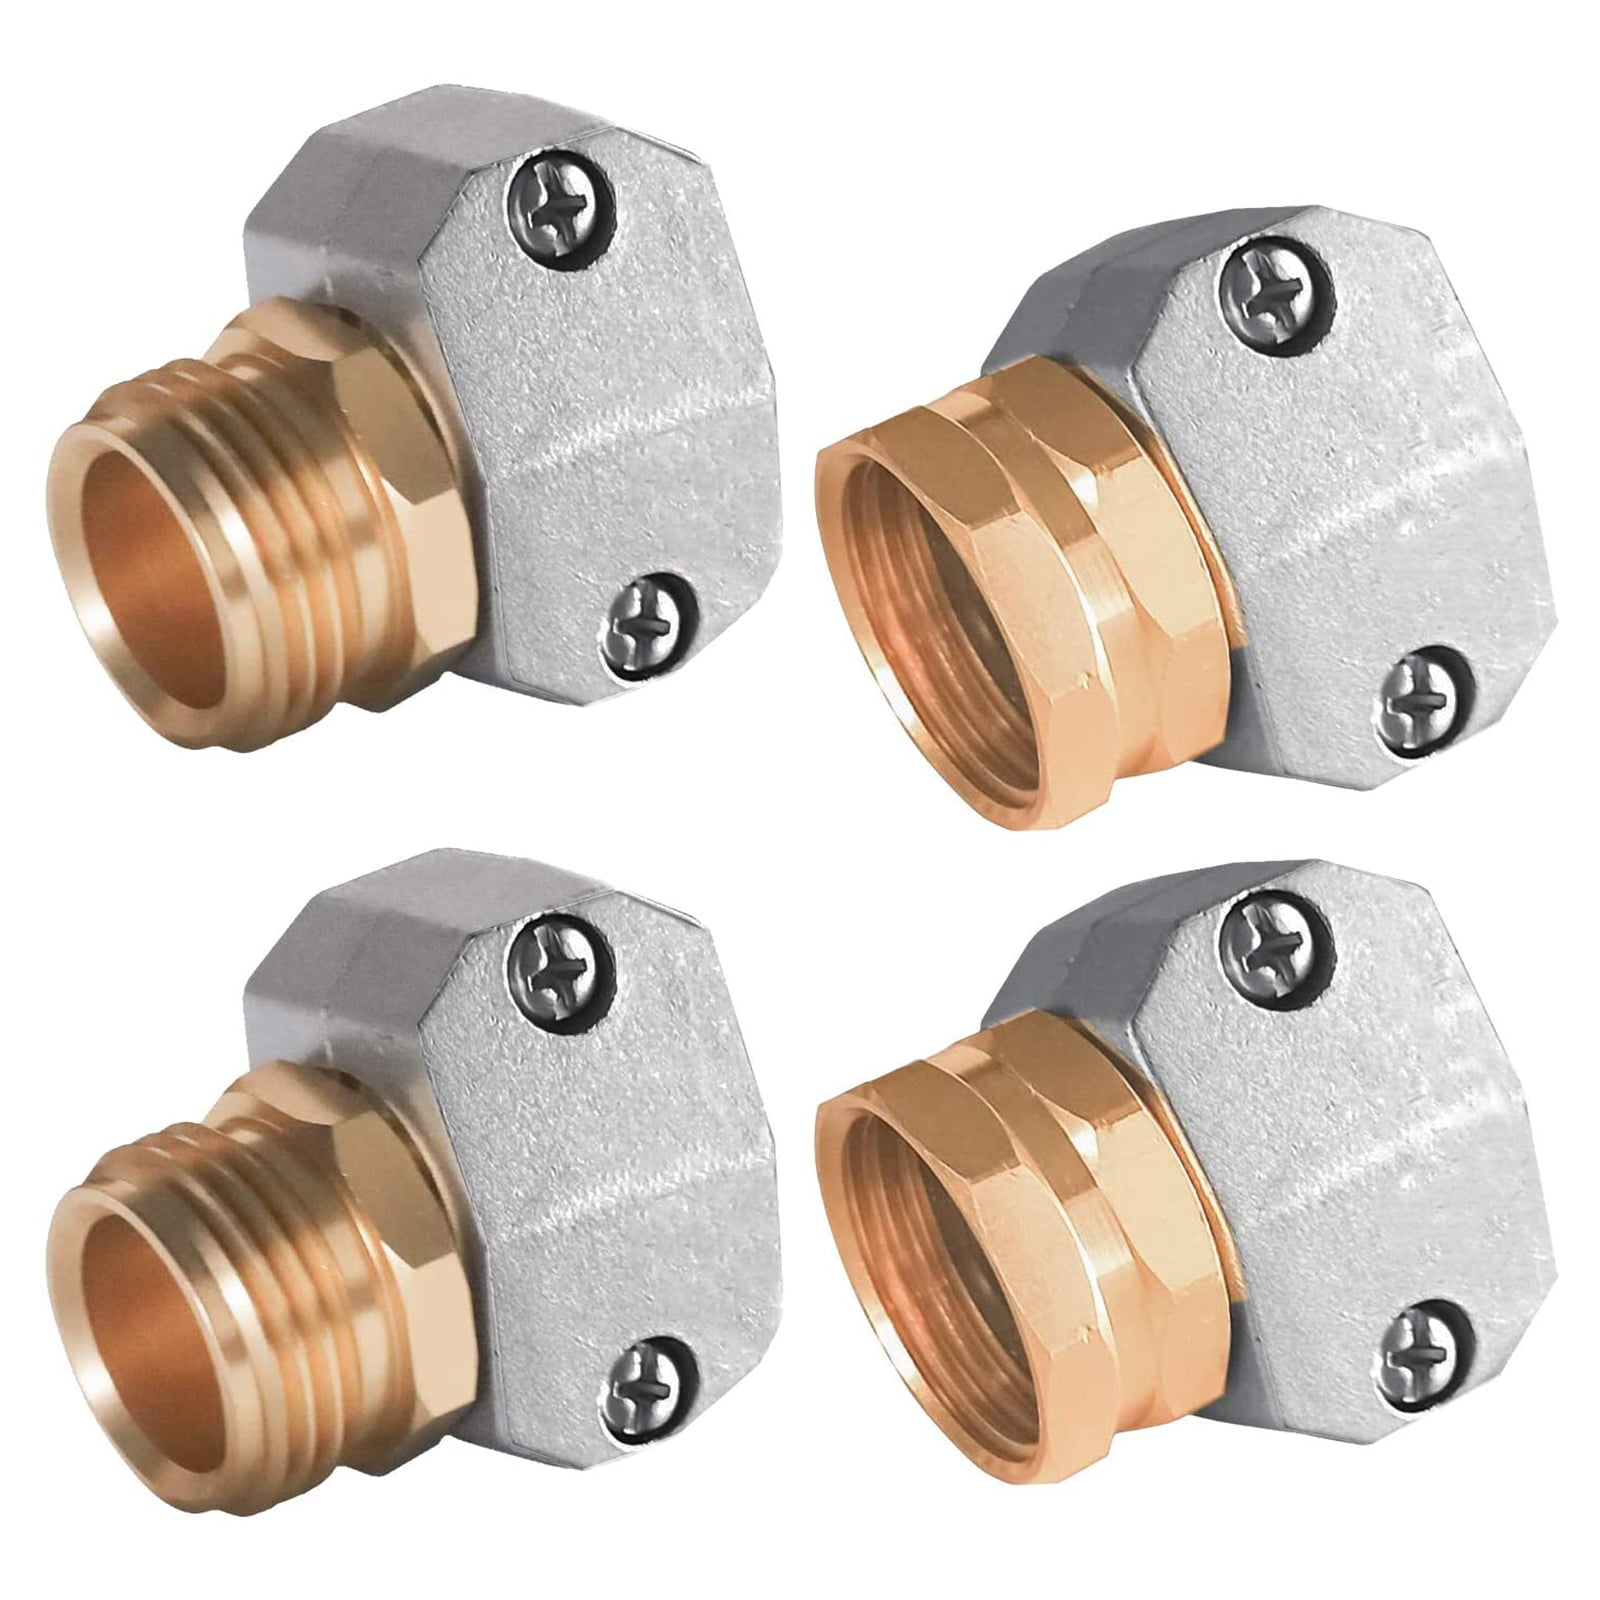 Details about   Internal & External Thread Water Hose Female and Male Quick Connectors Set 